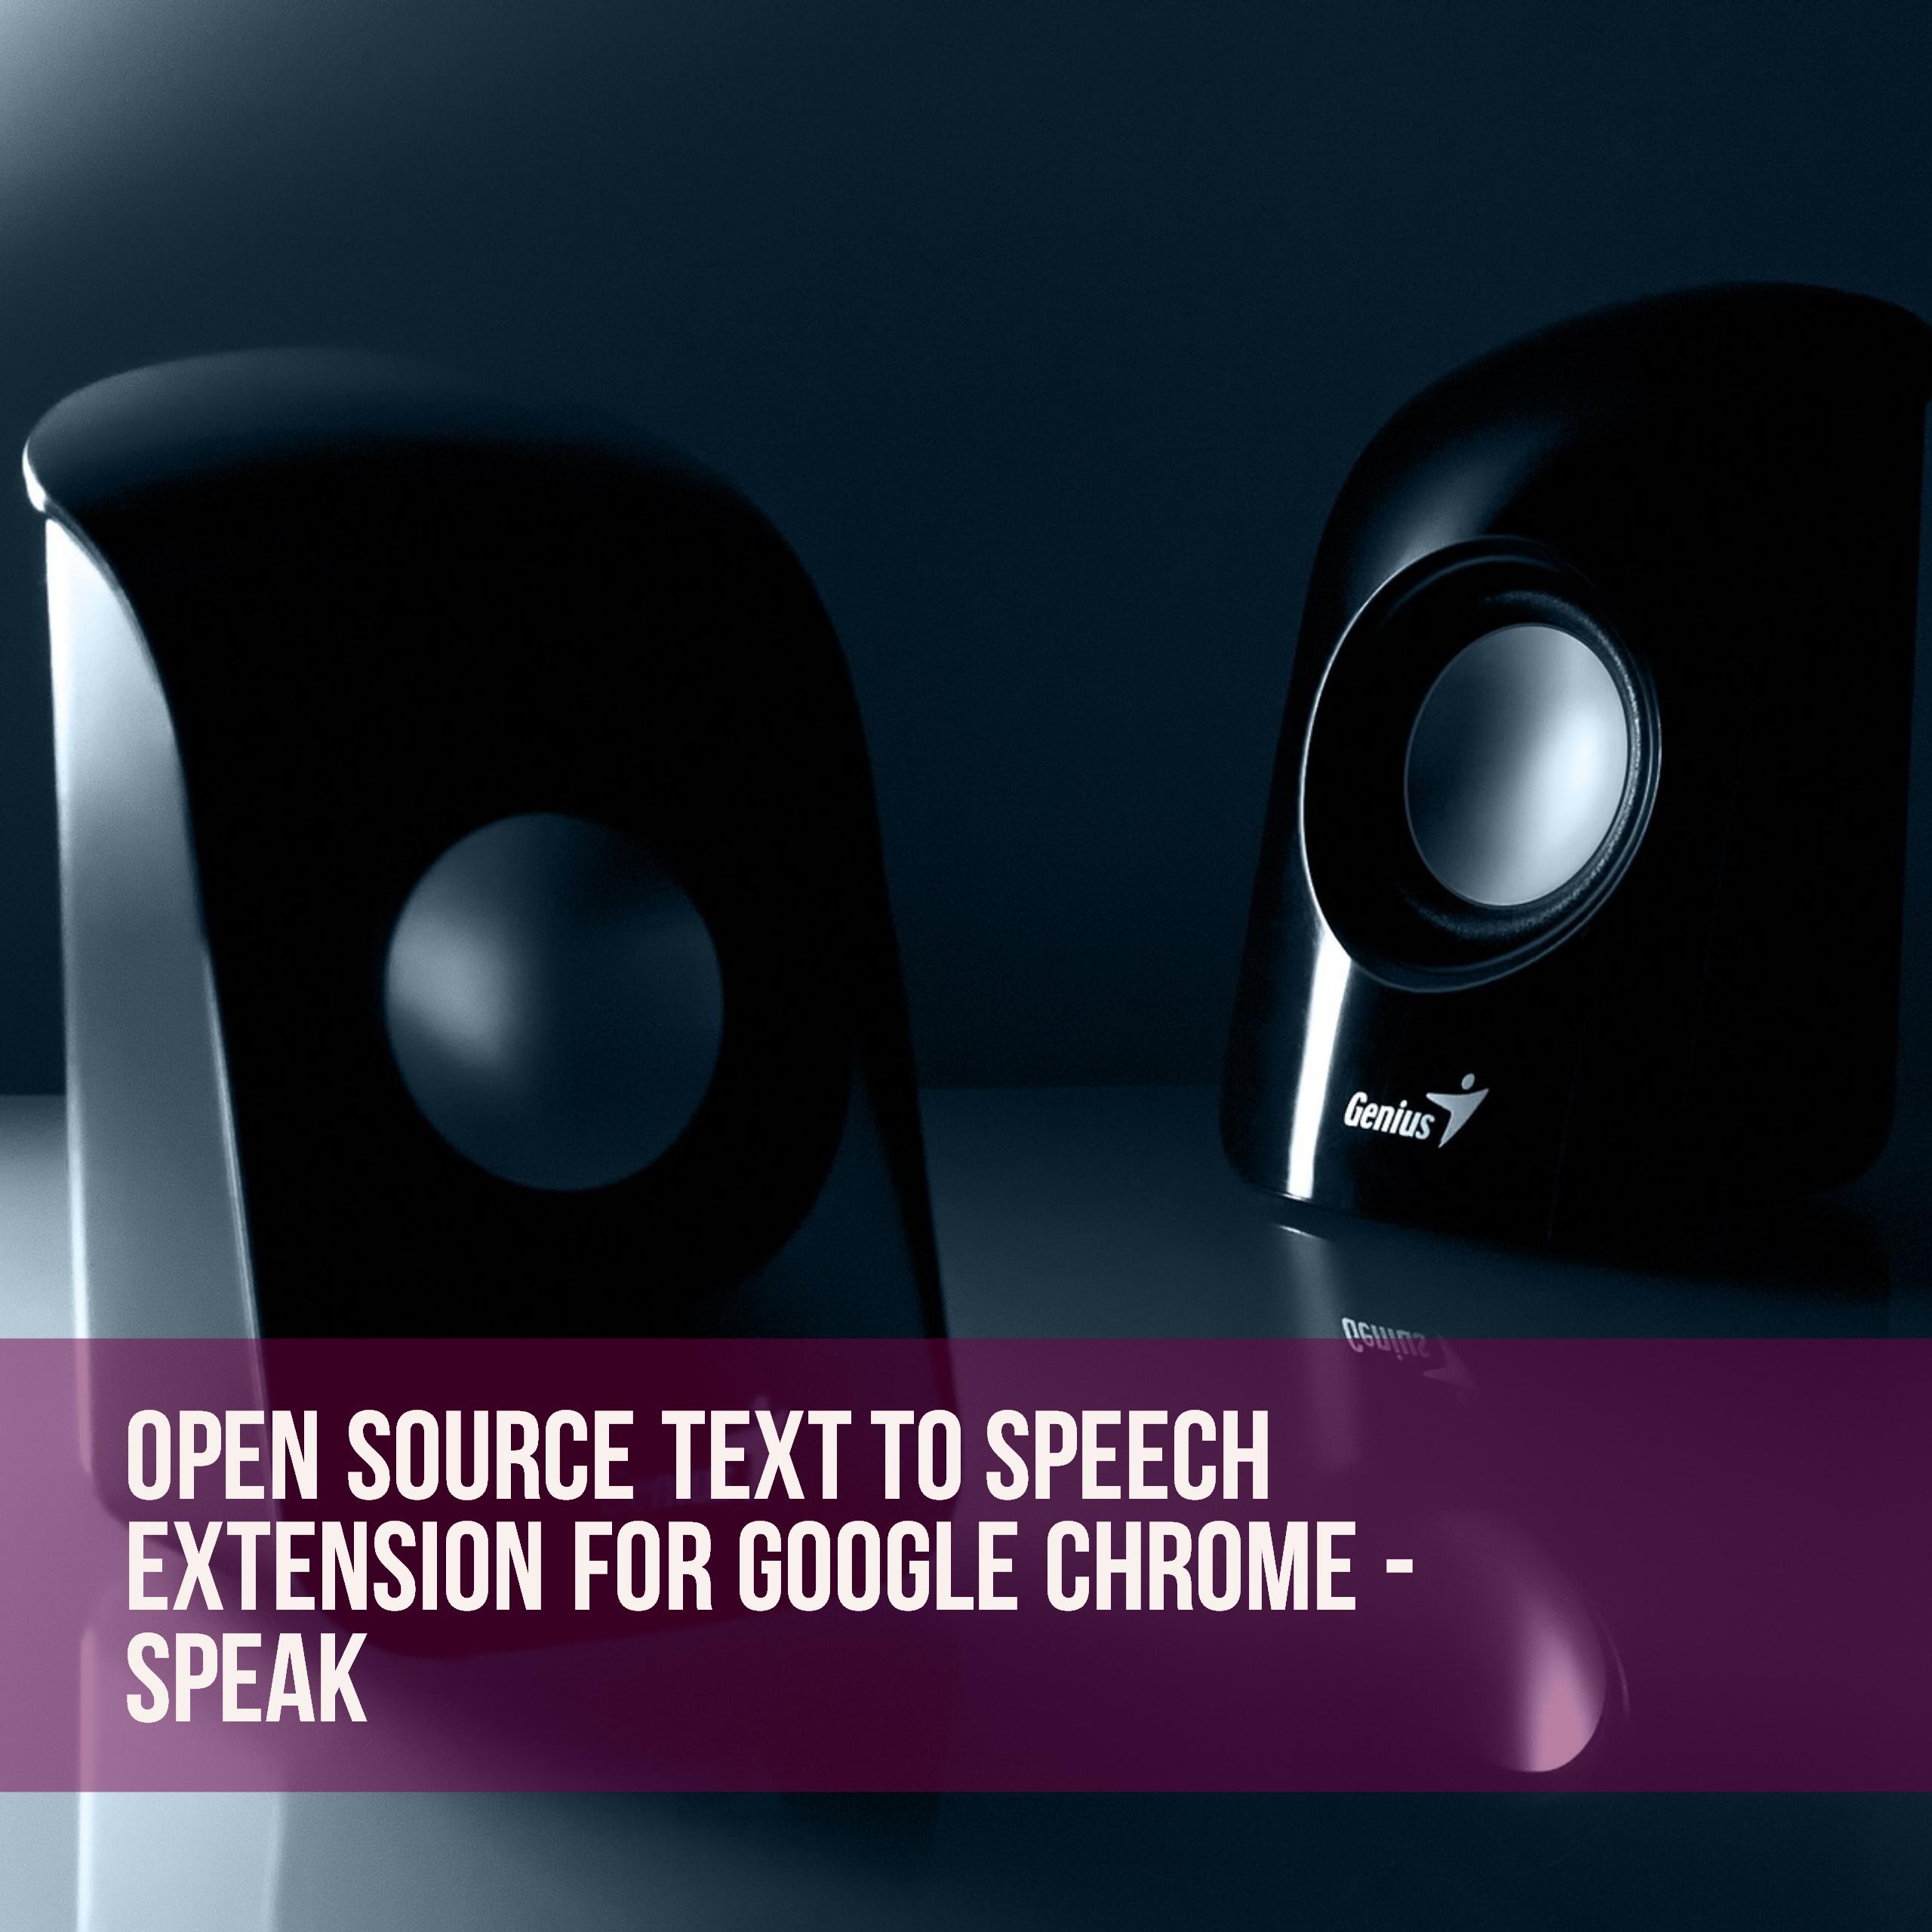 Open source text to speech extension for Google Chrome – Speak